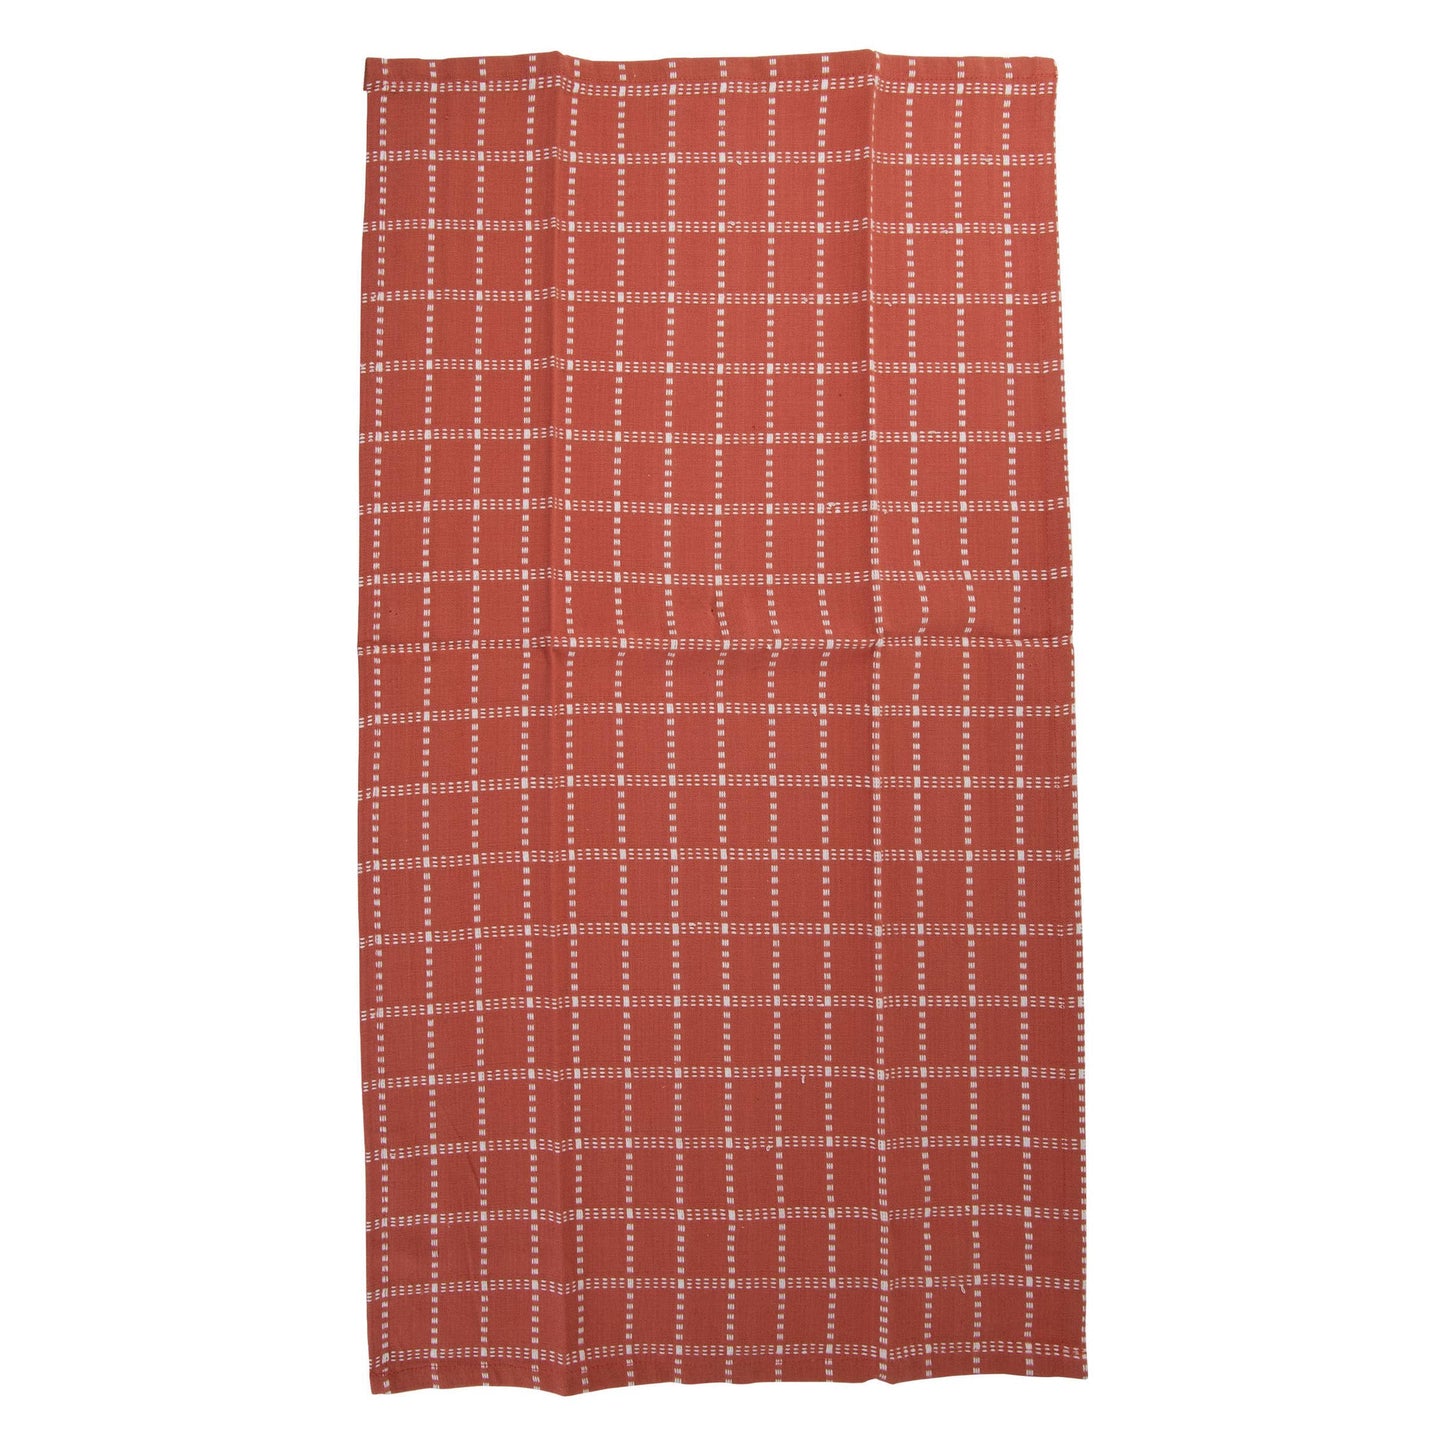 Foreside Home Set of 3 Logan Tea Towels Red